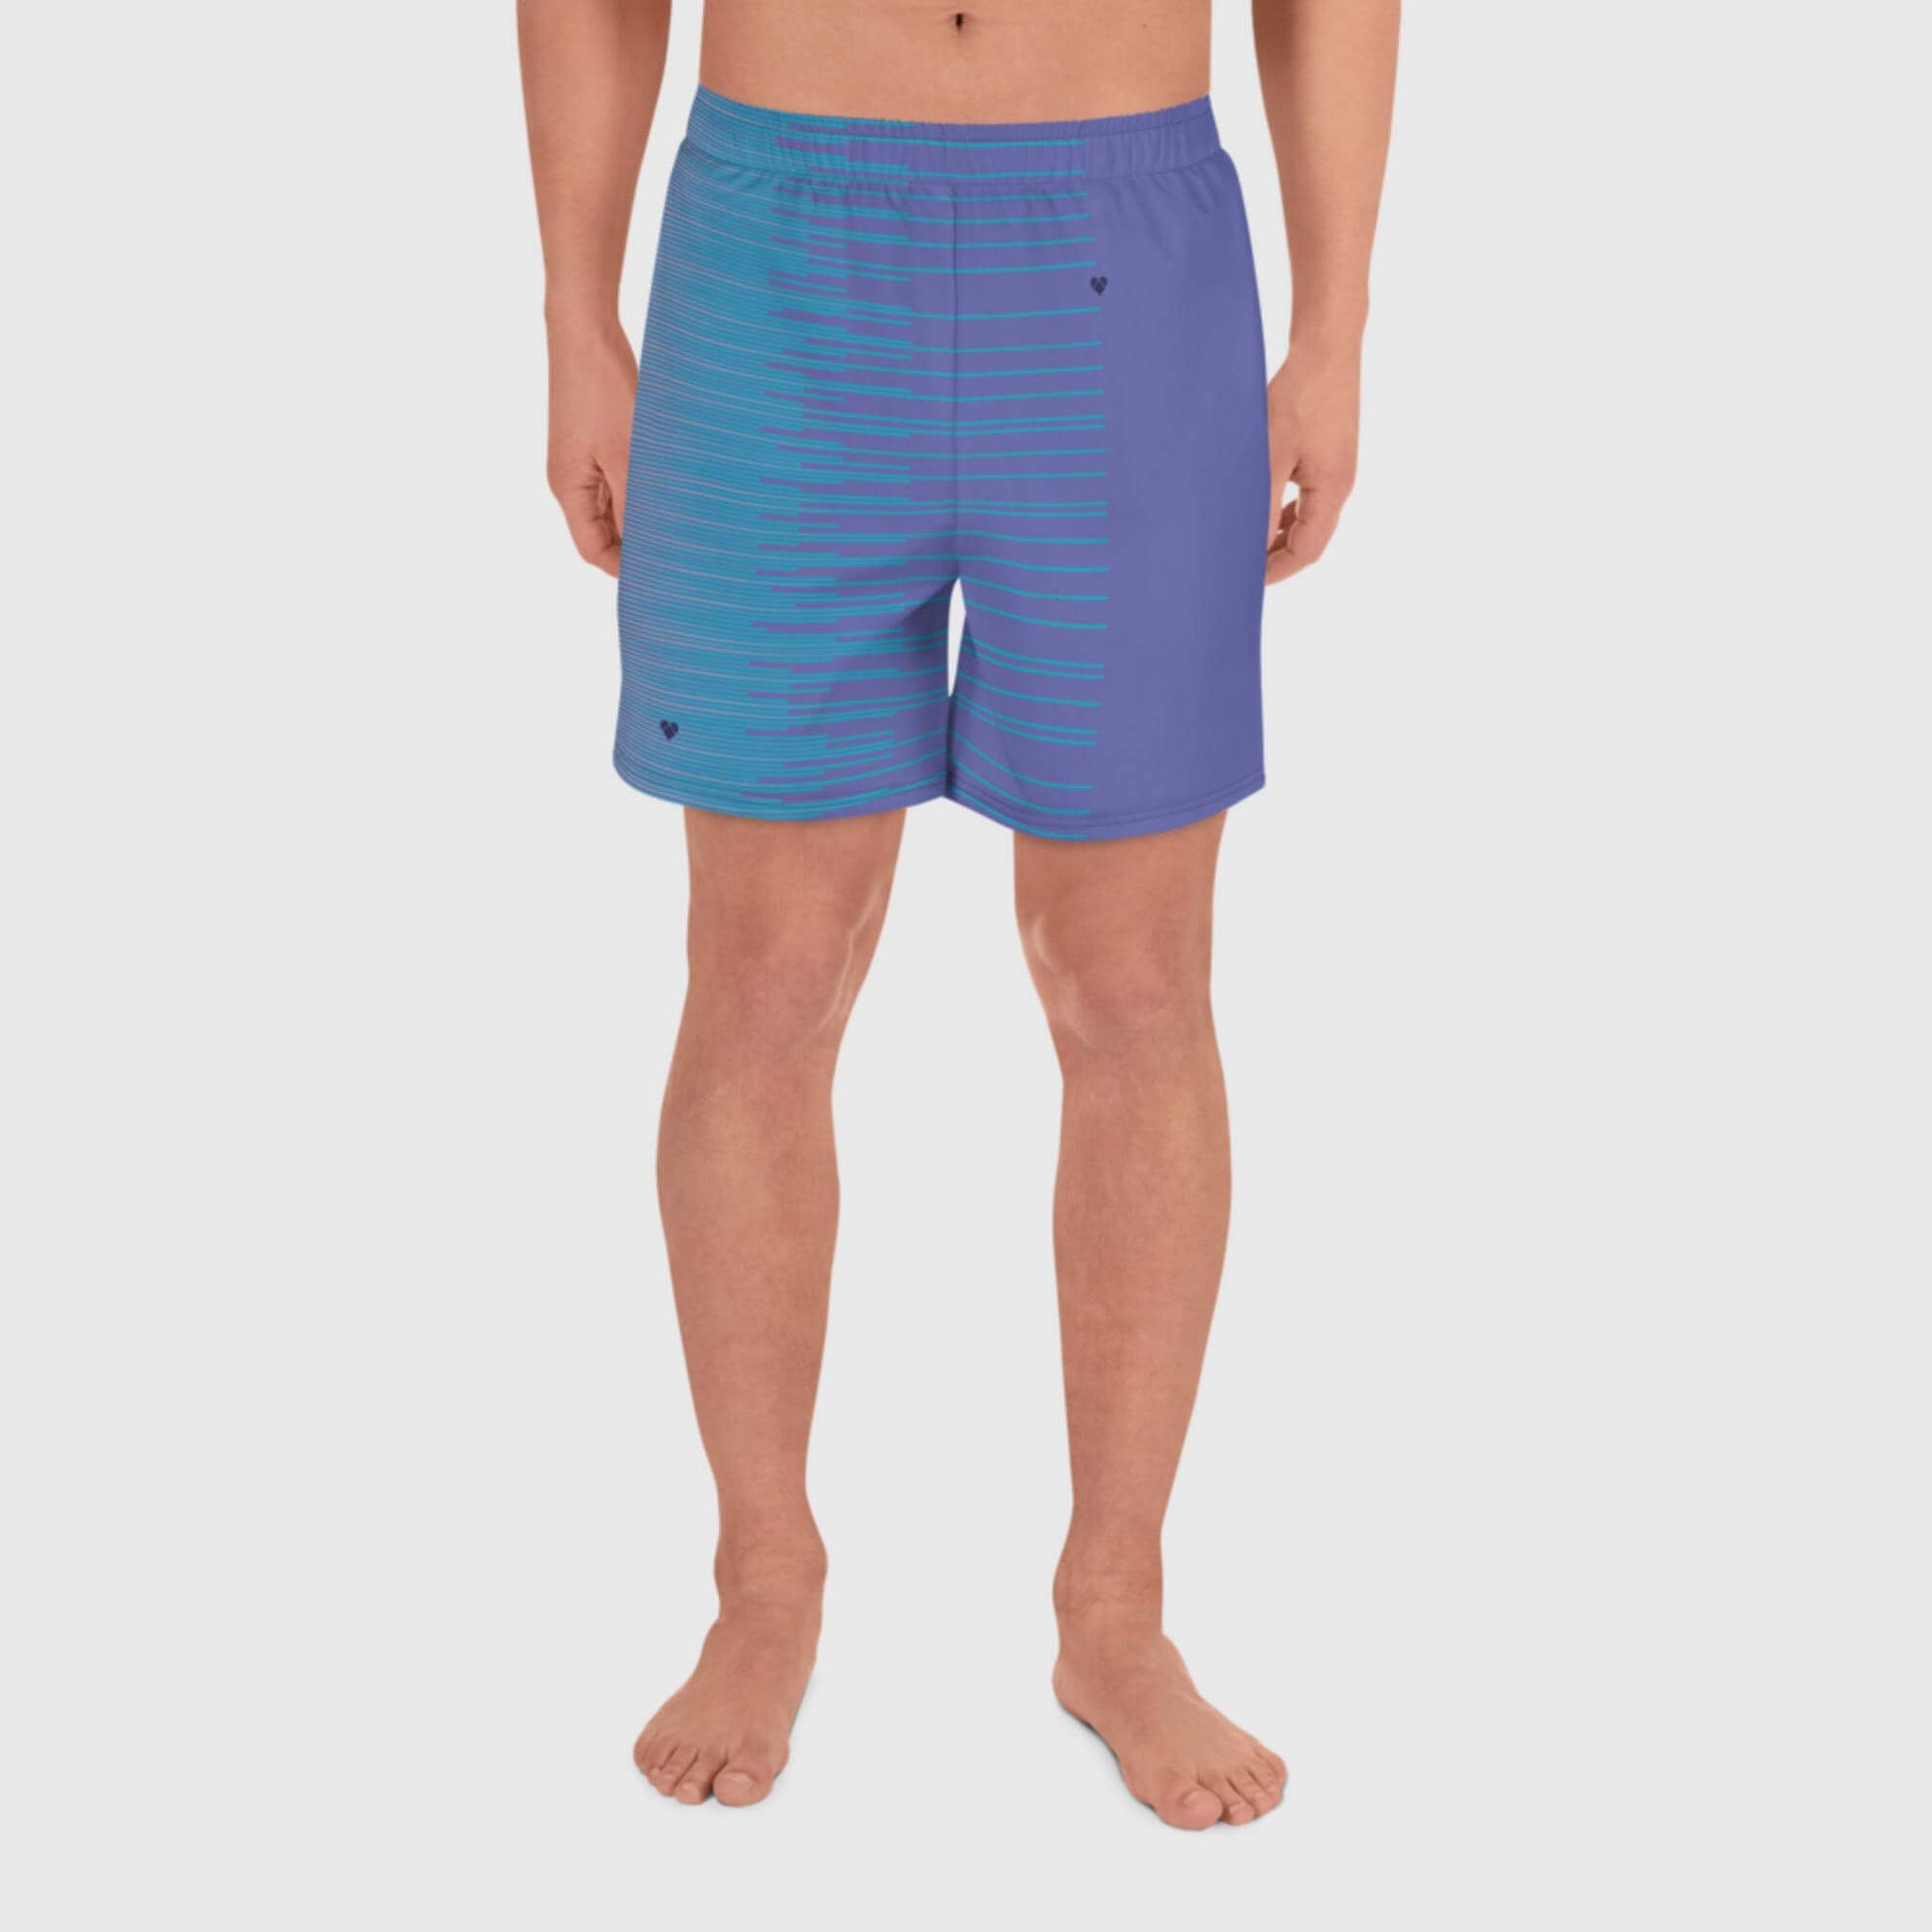 Fashionable Men's Sport Shorts in Periwinkle with Turquoise Stripes